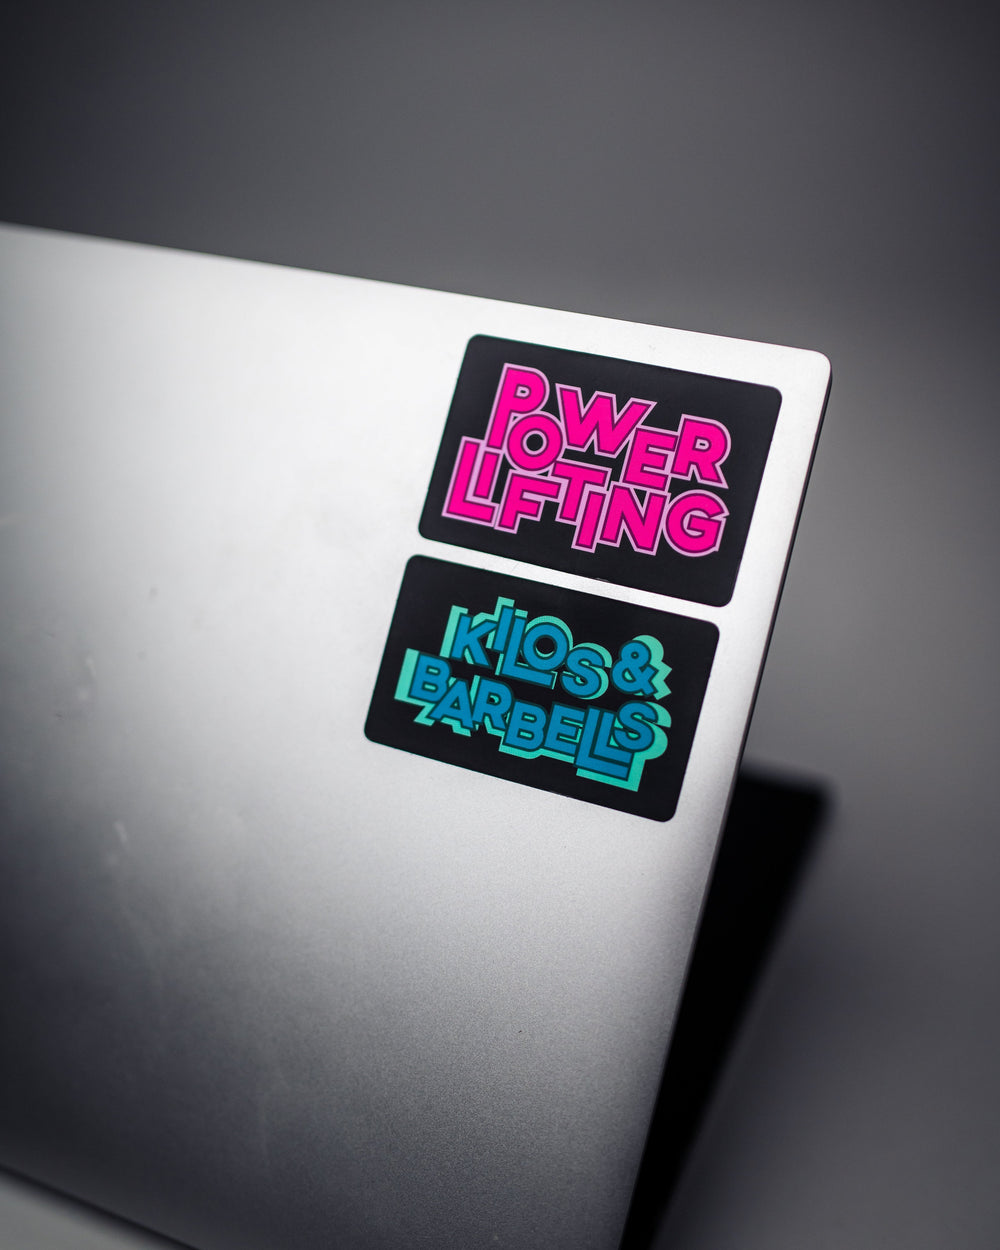 A7 Bubble Gum Power Sticker combines the dark with the fun and colourful designs to bring that pop of colour into the daily workouts. The sticker dye-cut, made from durable polypropylene and is 3 in wide x 2 in high. Purchase Bubble Gum Power sticker from A7 UK.